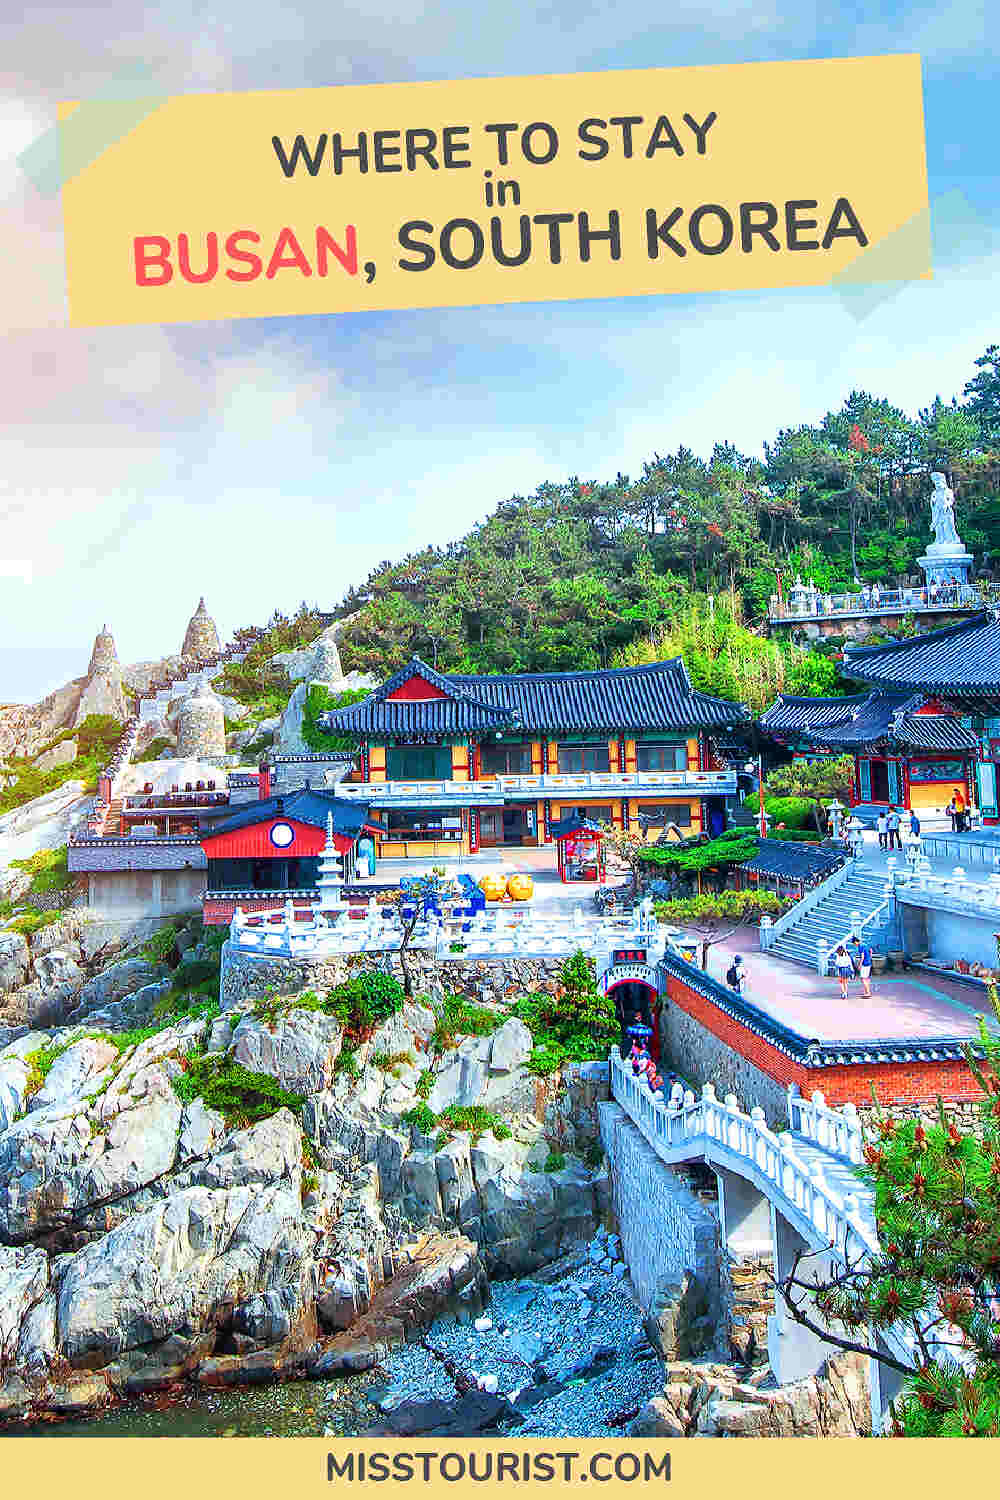 Travel poster featuring a coastal temple with text "Where to Stay in Busan, South Korea".